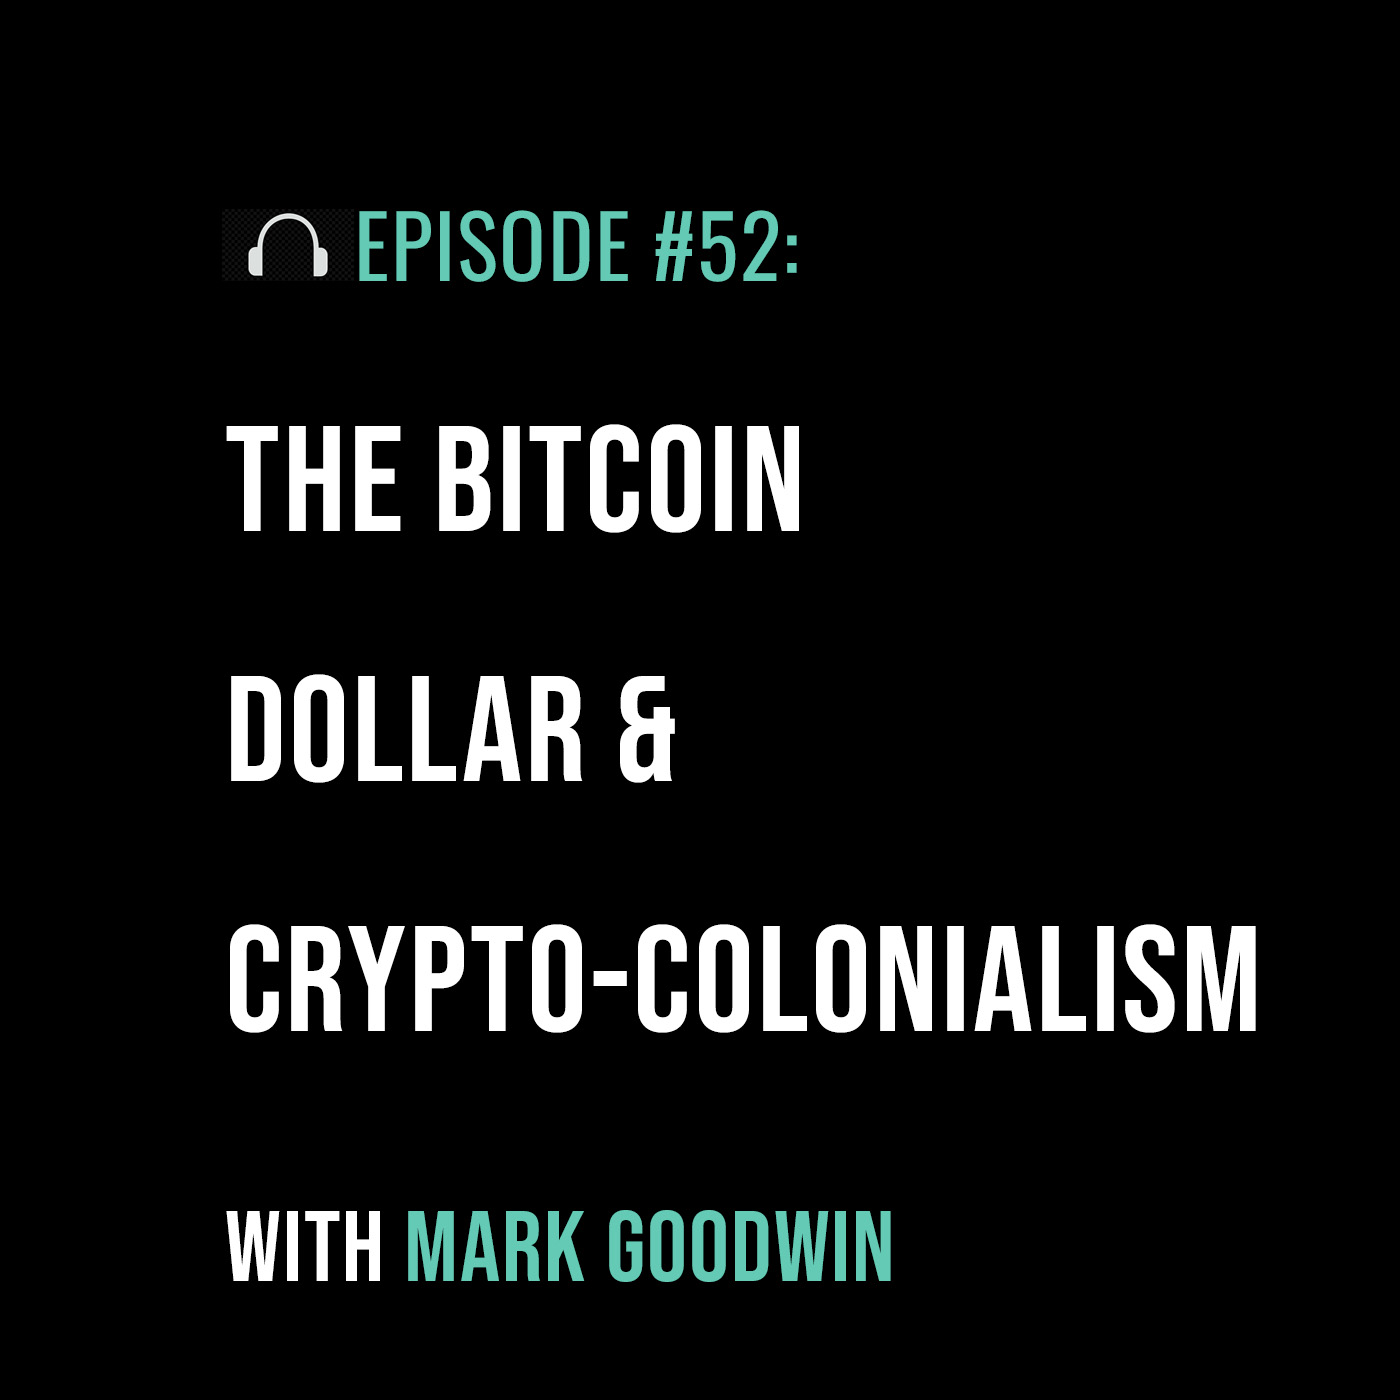 The Bitcoin Dollar & Crypto-Colonialism with Mark Goodwin